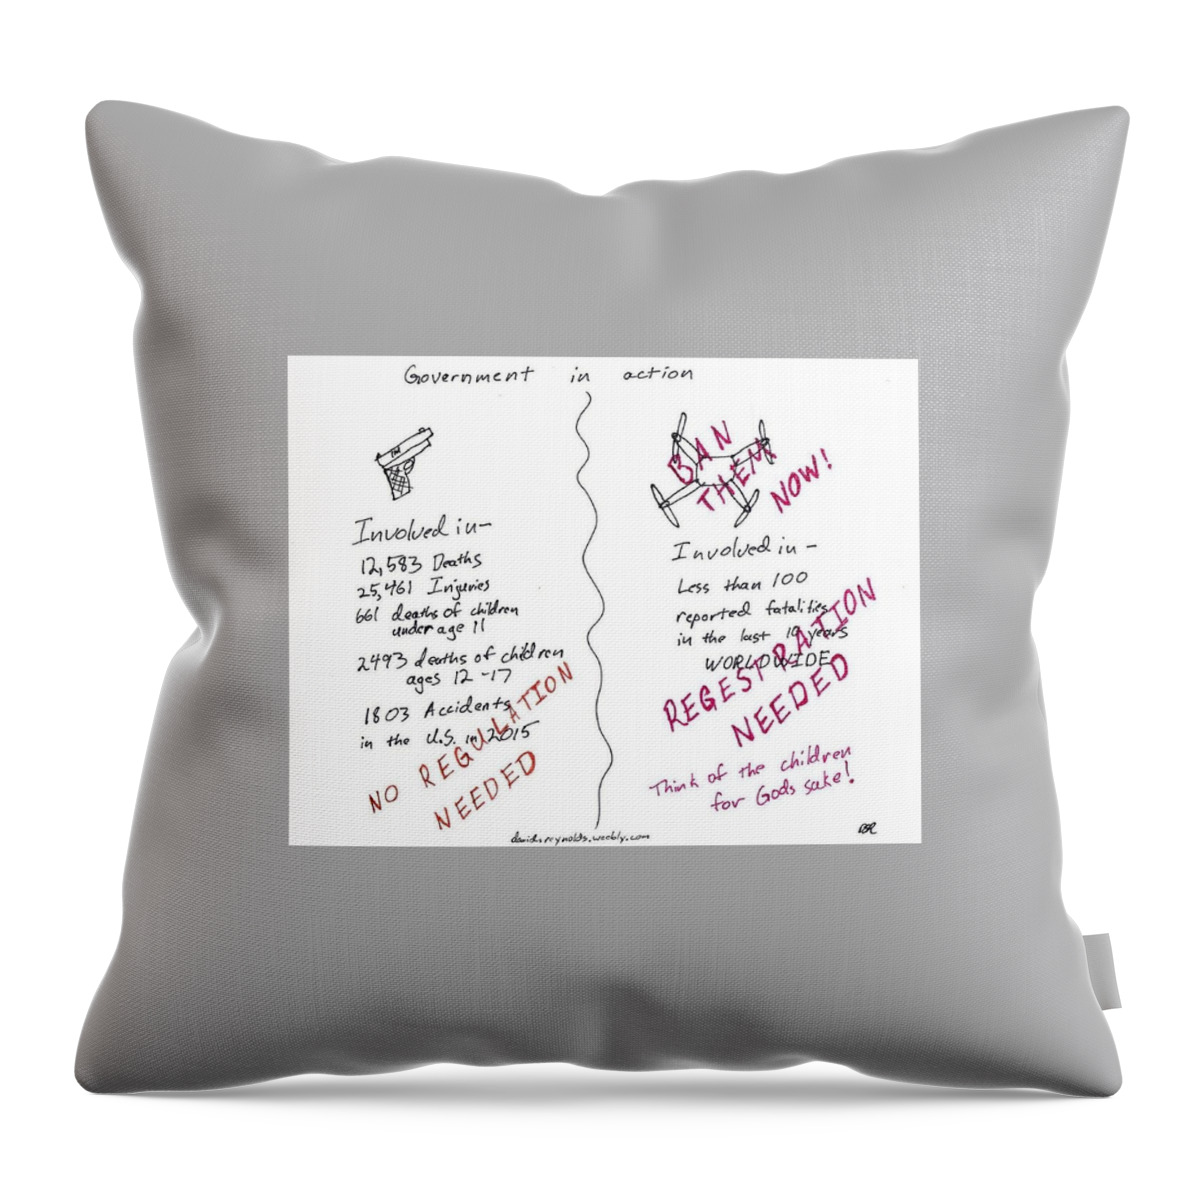 Aeromodeling Throw Pillow featuring the drawing Government inaction by David S Reynolds